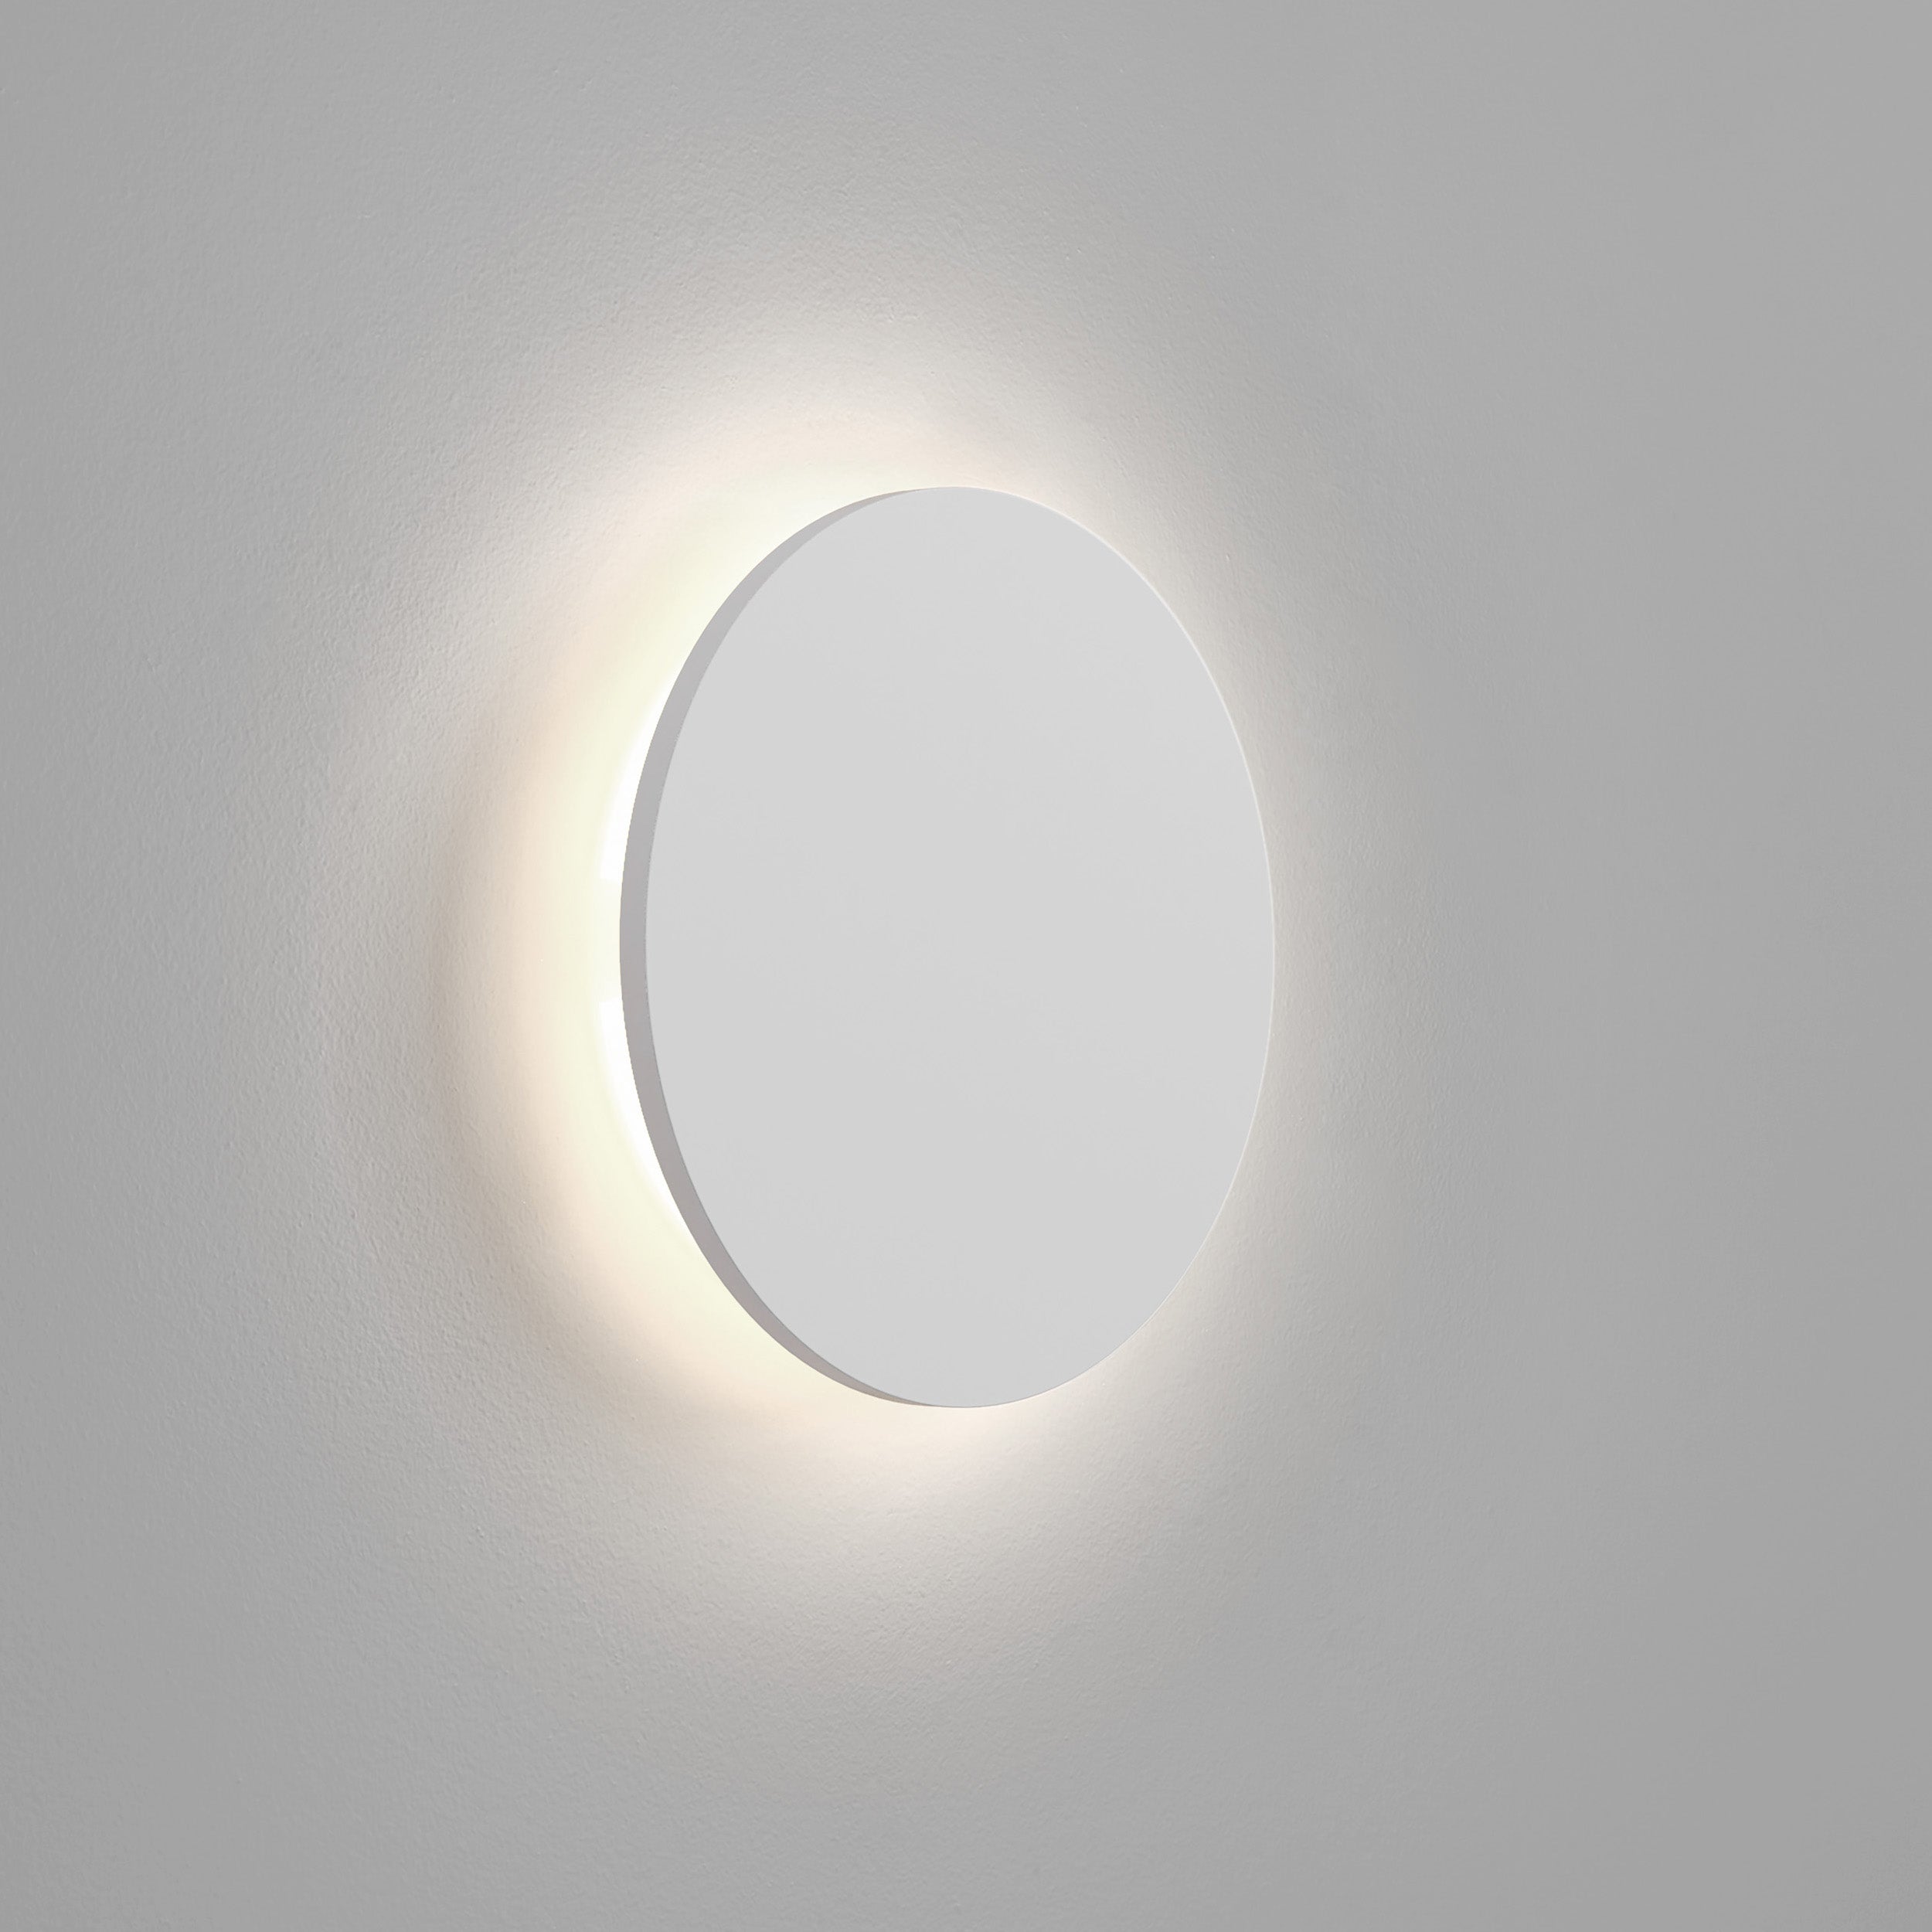 Astro Lighting Eclipse Wall Light Fixtures Astro Lighting 1.61xx Plaster Yes (Integral), LED Strip